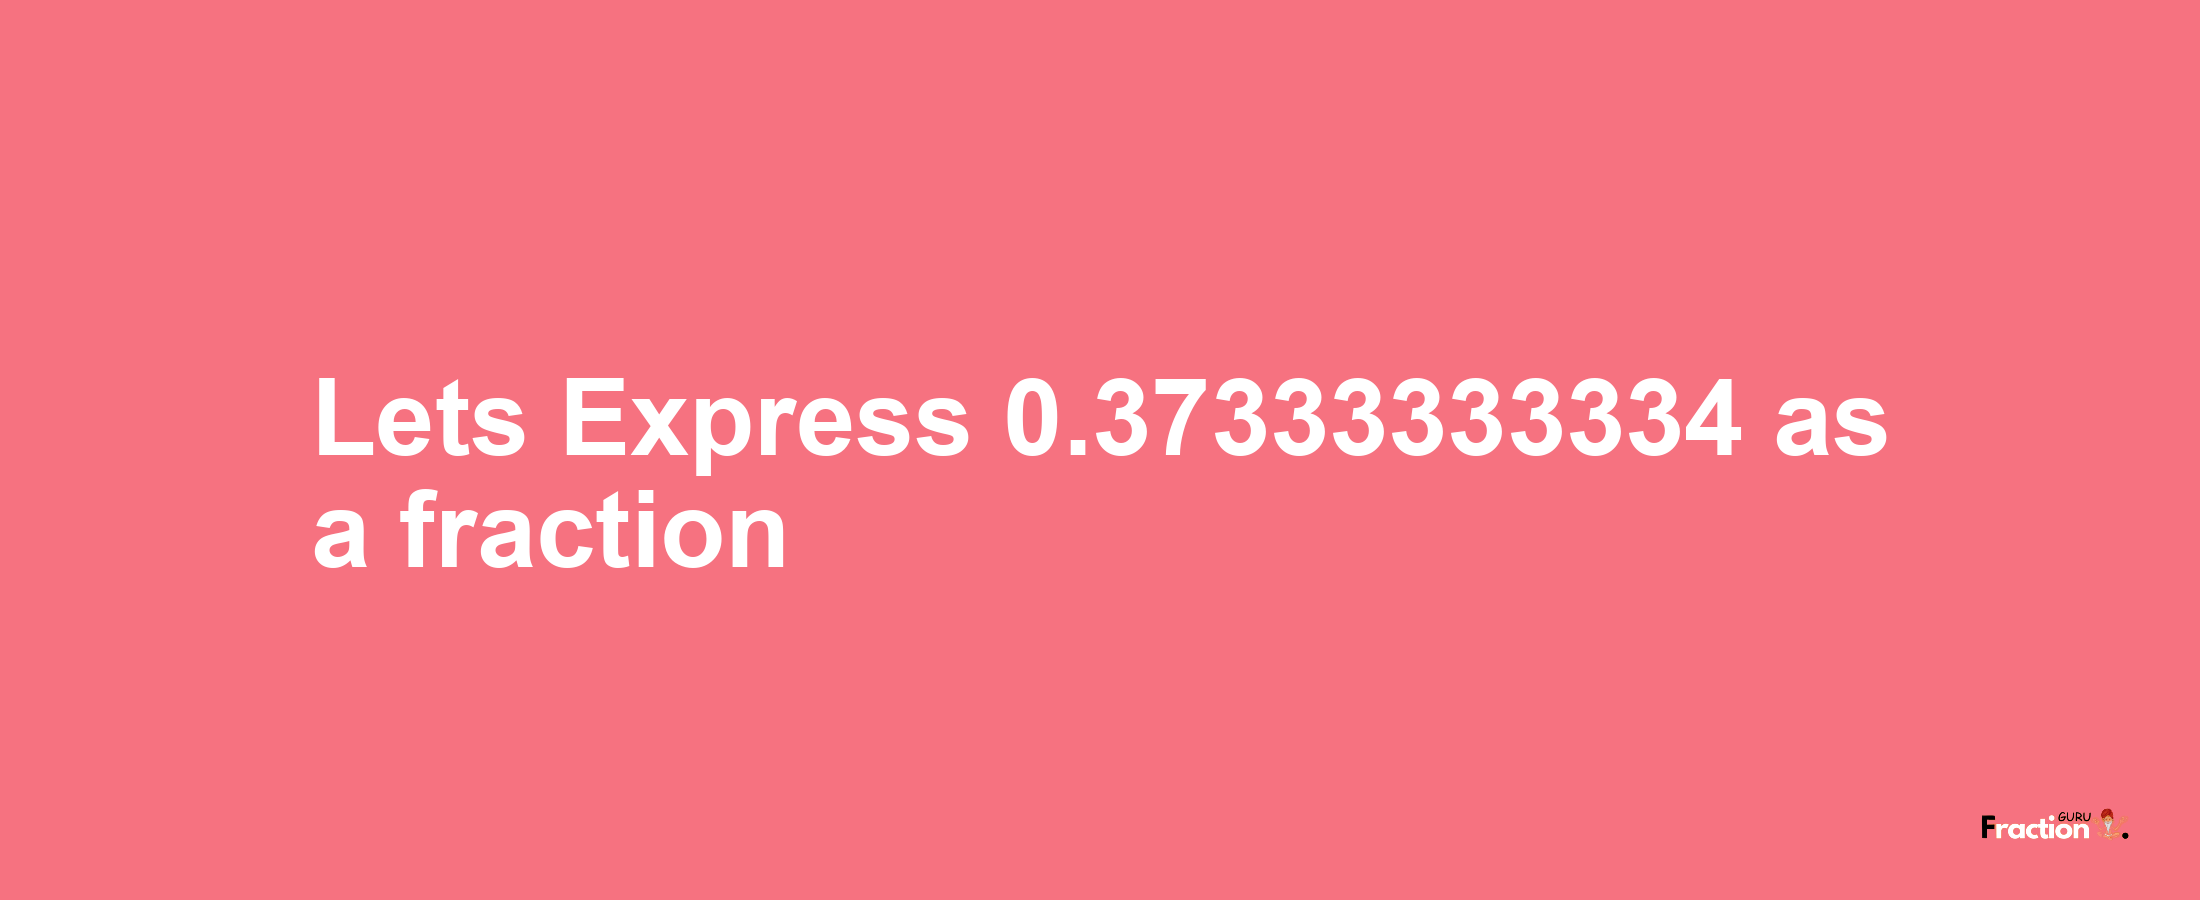 Lets Express 0.37333333334 as afraction